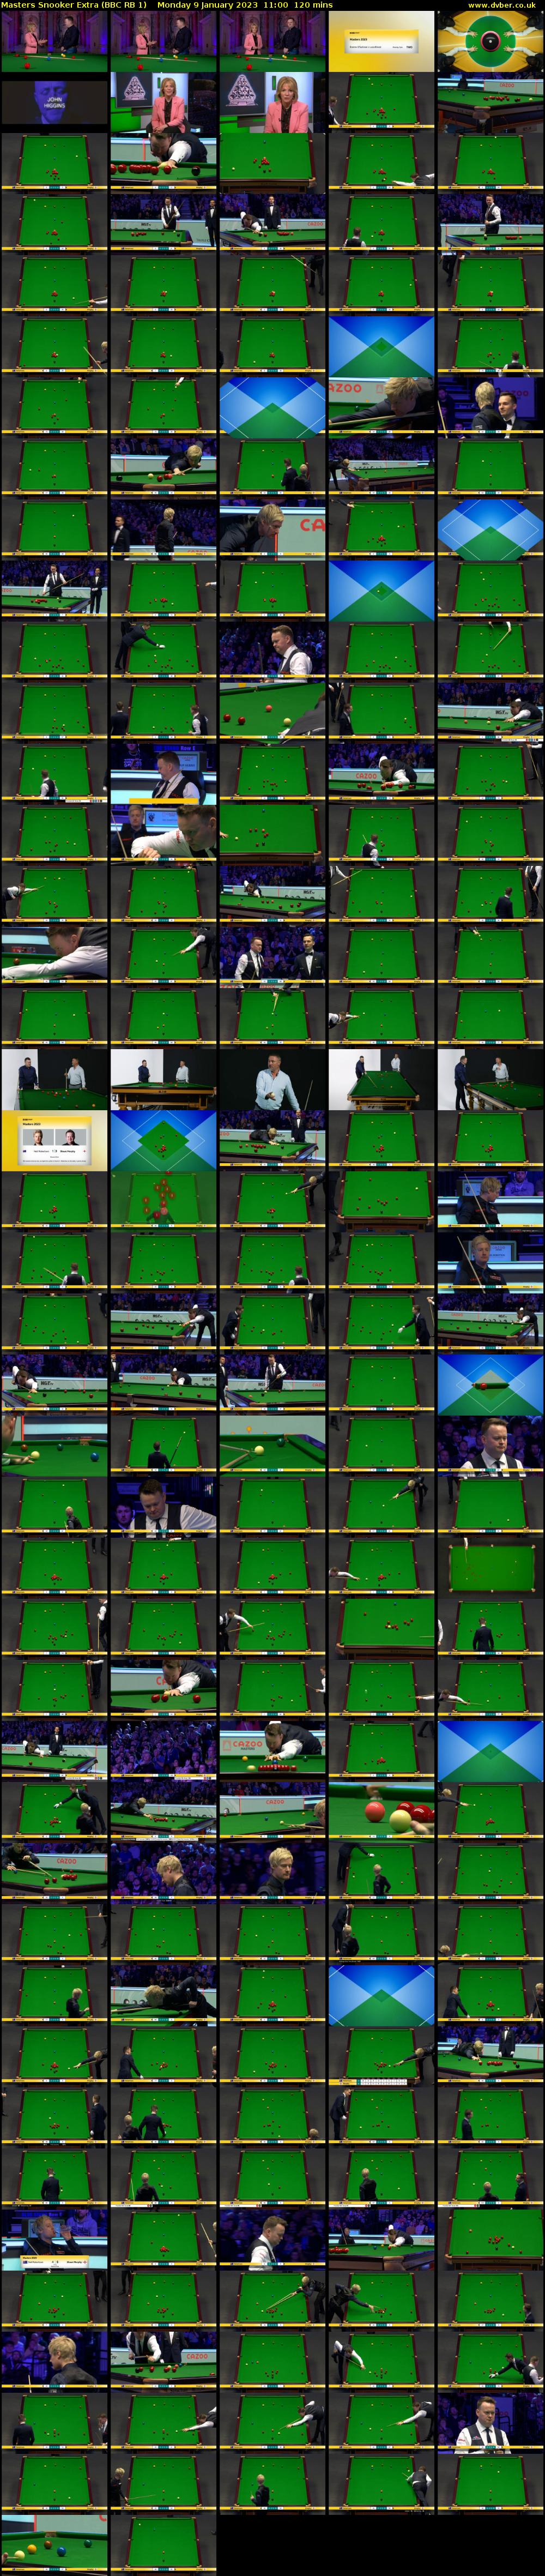 Masters Snooker Extra (BBC RB 1) Monday 9 January 2023 11:00 - 13:00